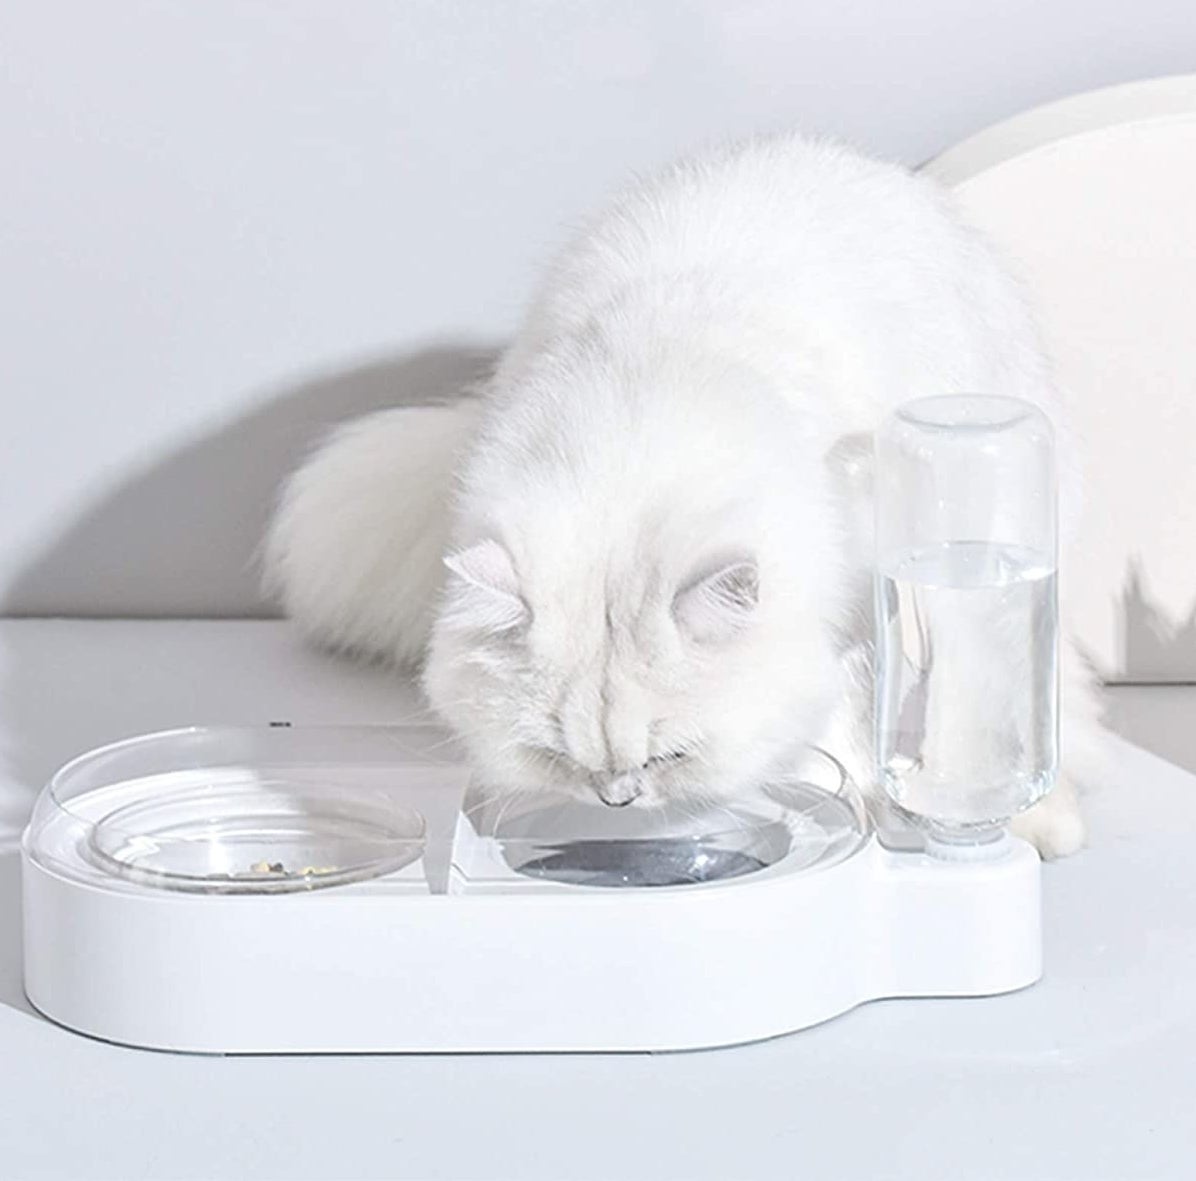 Cat drinks from white double bowl